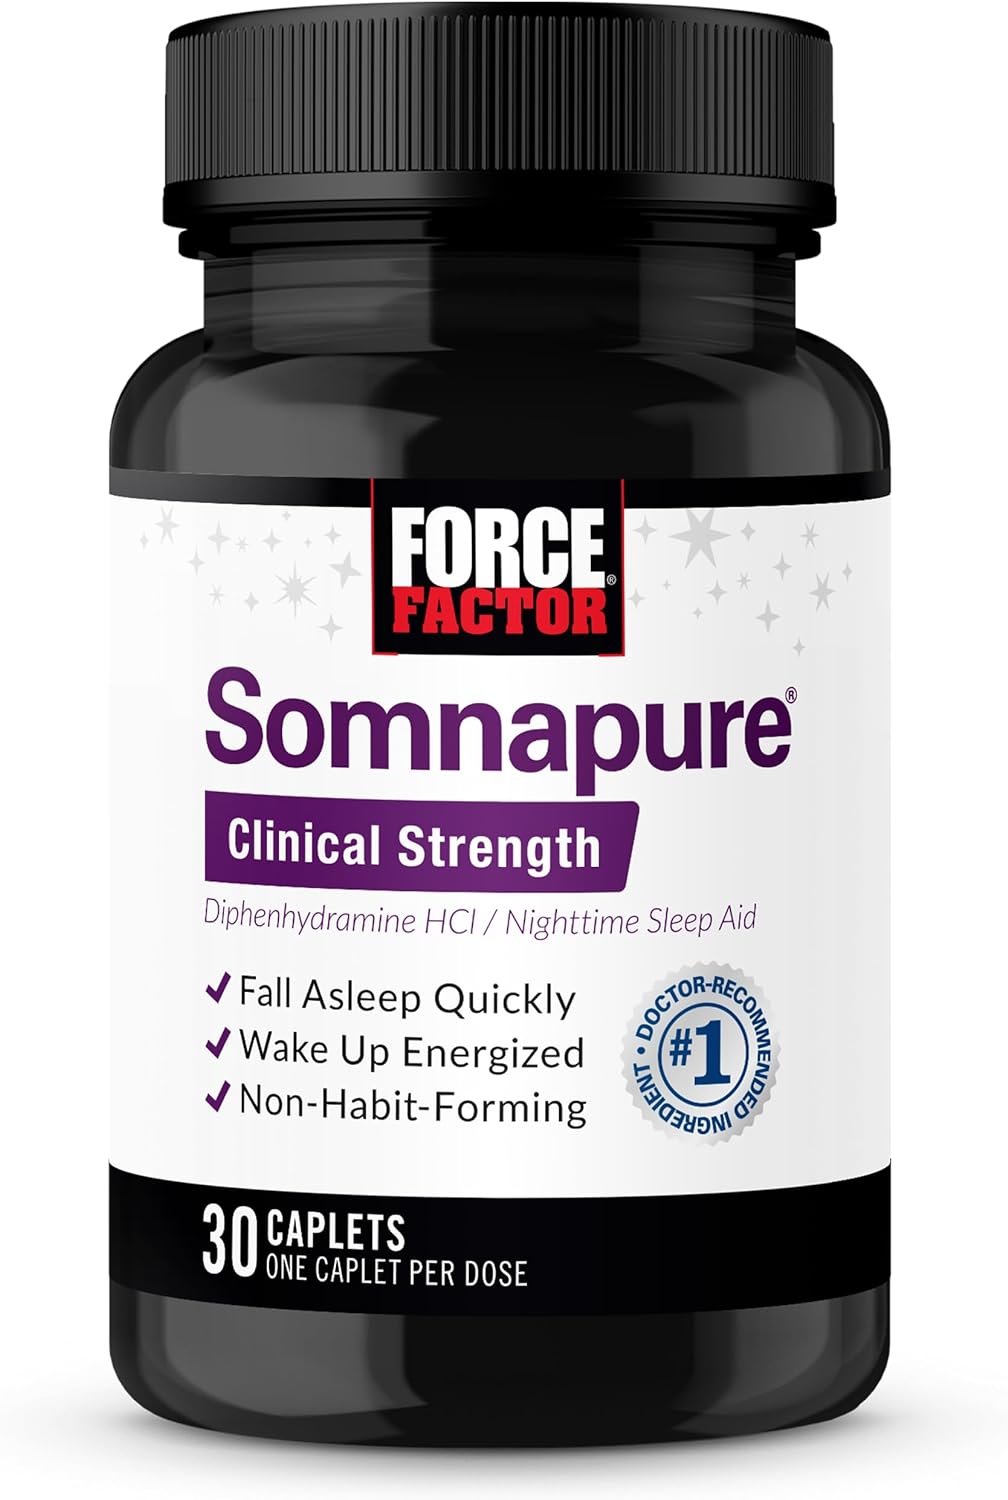 FORCE FACTOR Somnapure Clinical Strength Sleep Aid for Adults, Diphenhydramine HCl, Non-Habit-Forming, Nighttime Sleep Support, 30 Caplets